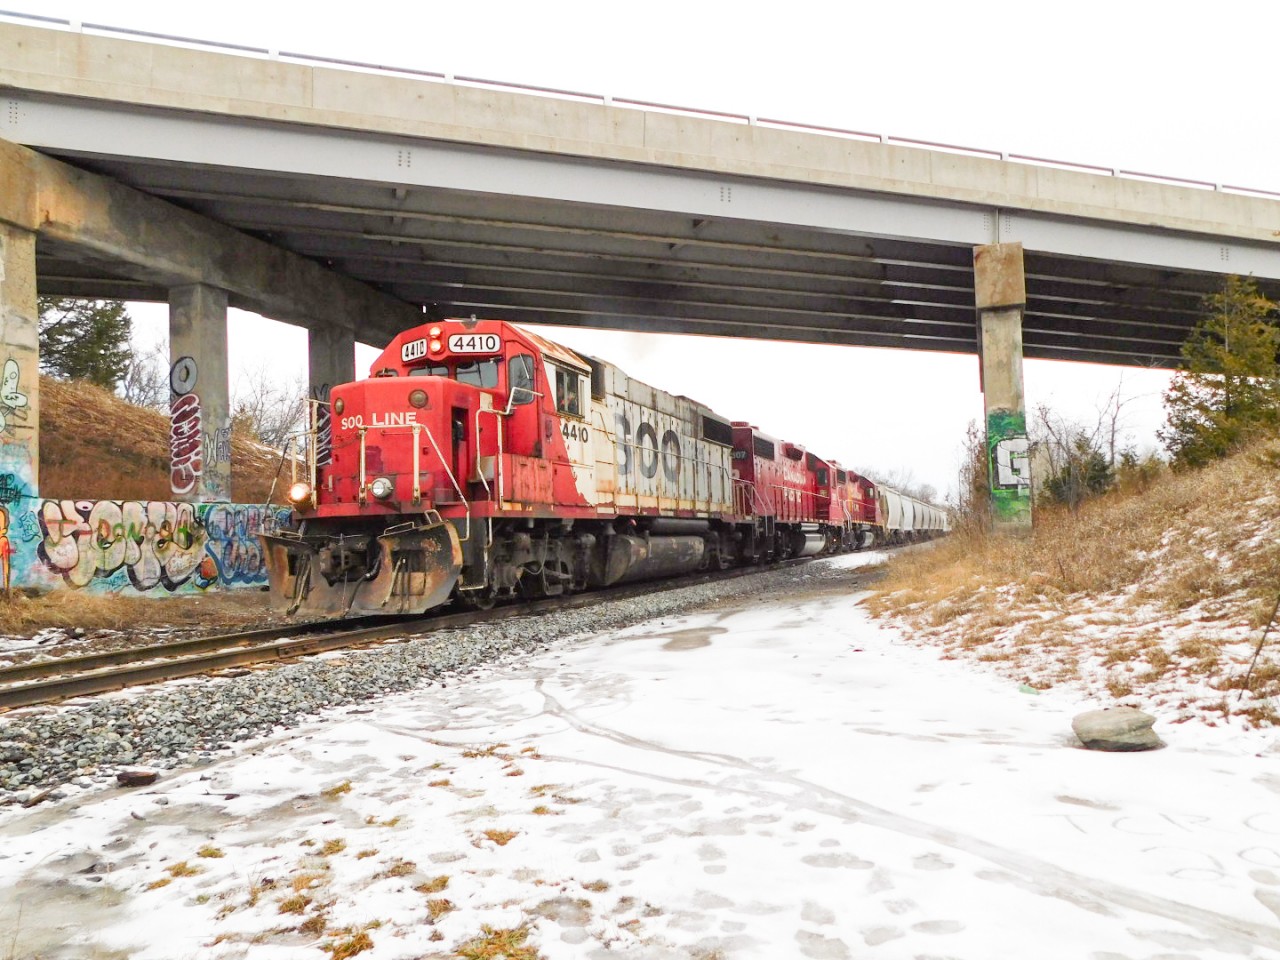 Once in a lifetime opportunity to catch a SOO line leading on this ancient rail line.